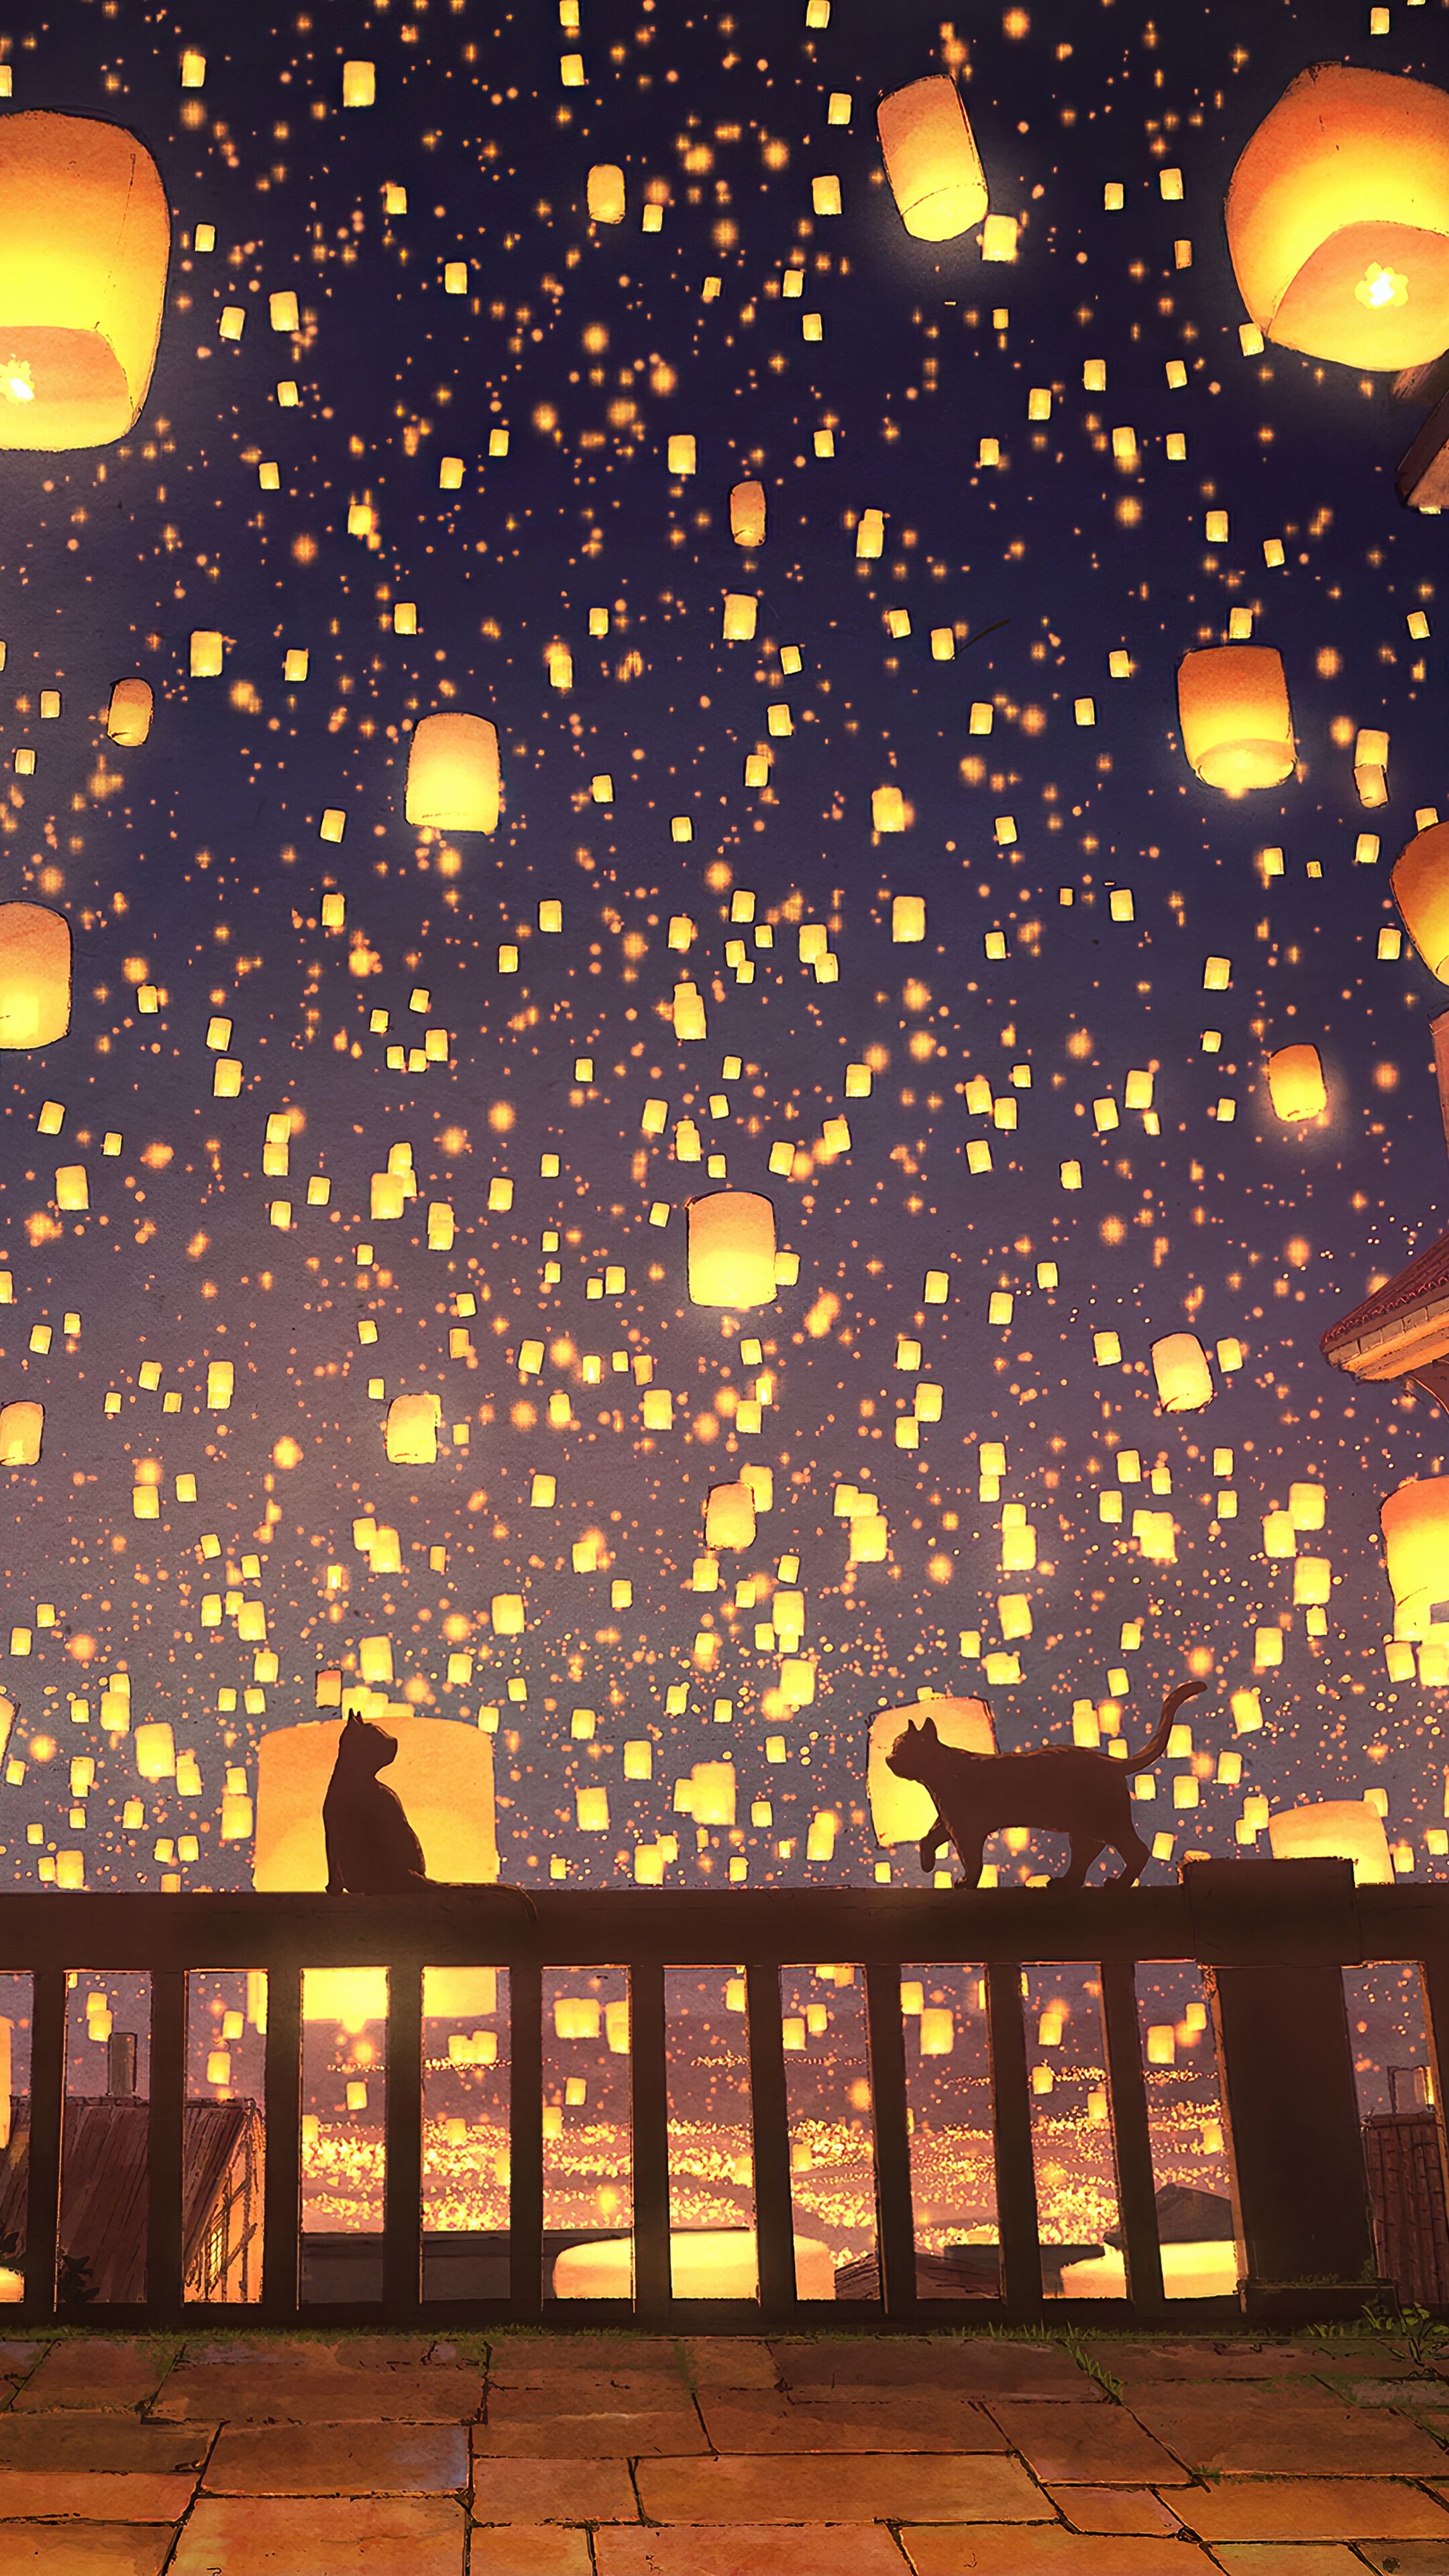 Anime, Sky Lantern, Cat, Night, Scenery, 4K phone HD Wallpaper, Image, Background, Photo and Picture